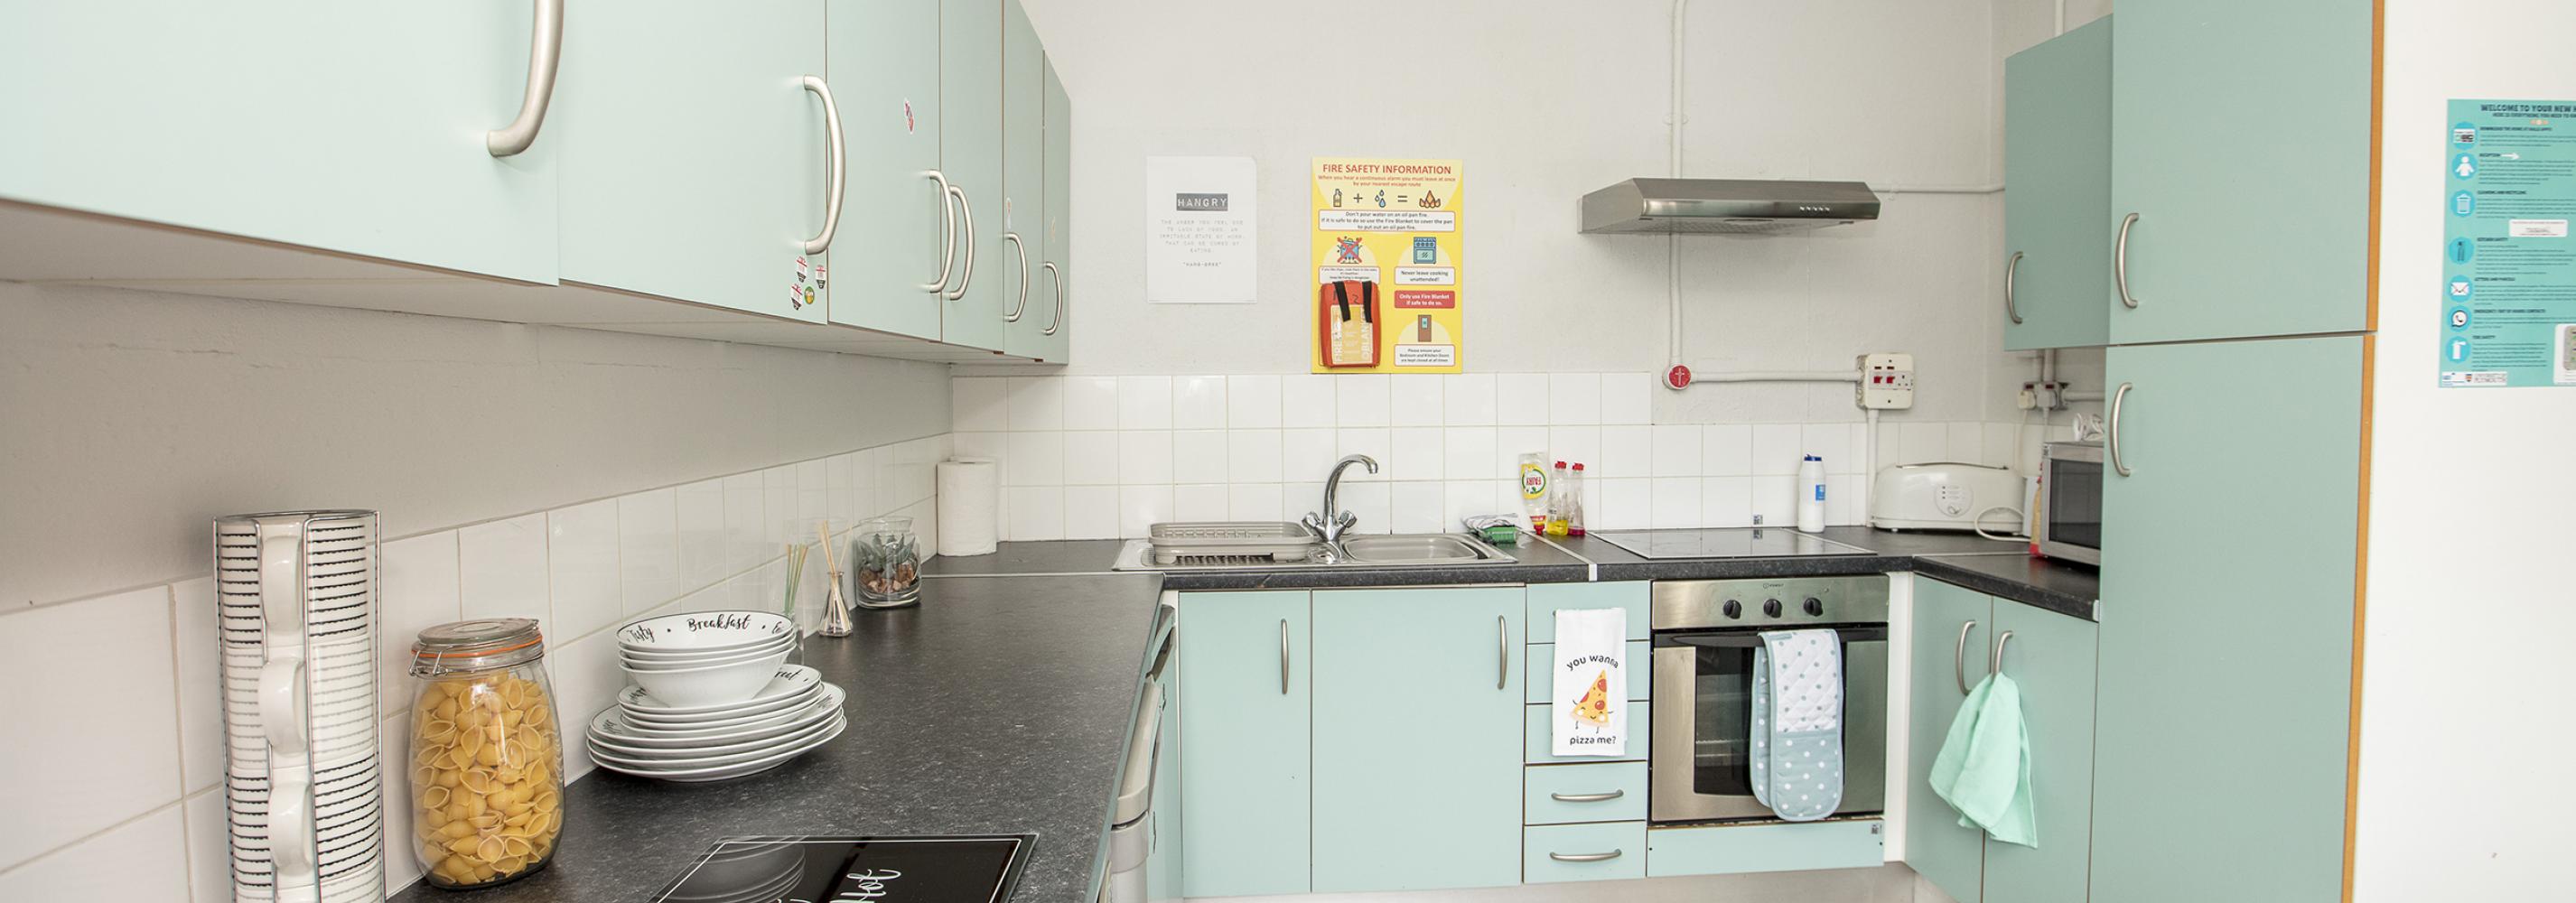 Kitchen, extractor fan, teal coloured cupboards, oven, hob, sink, toaster, fire blanket